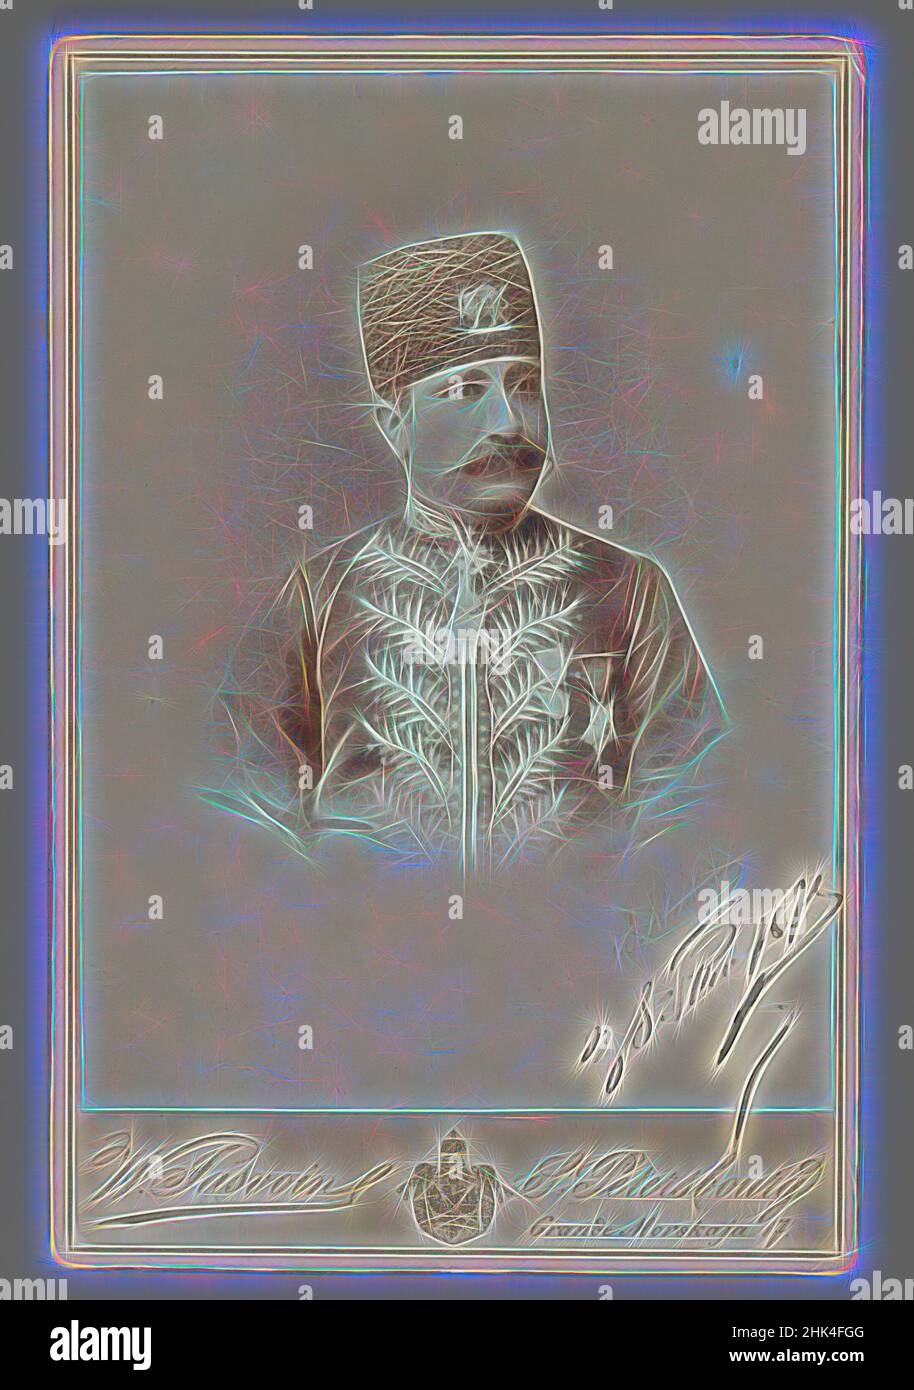 Inspired by One of 274 Vintage Photographs, Gelatin silver printing out paper, 1875, Qajar, Qajar Period, Photo: 5 1/2 x 4 in., 13.9 x 10.1 cm;, cartes de visite, military, moustache, photograph, photography, Qajar, Russia, St. Petersburg, Reimagined by Artotop. Classic art reinvented with a modern twist. Design of warm cheerful glowing of brightness and light ray radiance. Photography inspired by surrealism and futurism, embracing dynamic energy of modern technology, movement, speed and revolutionize culture Stock Photo